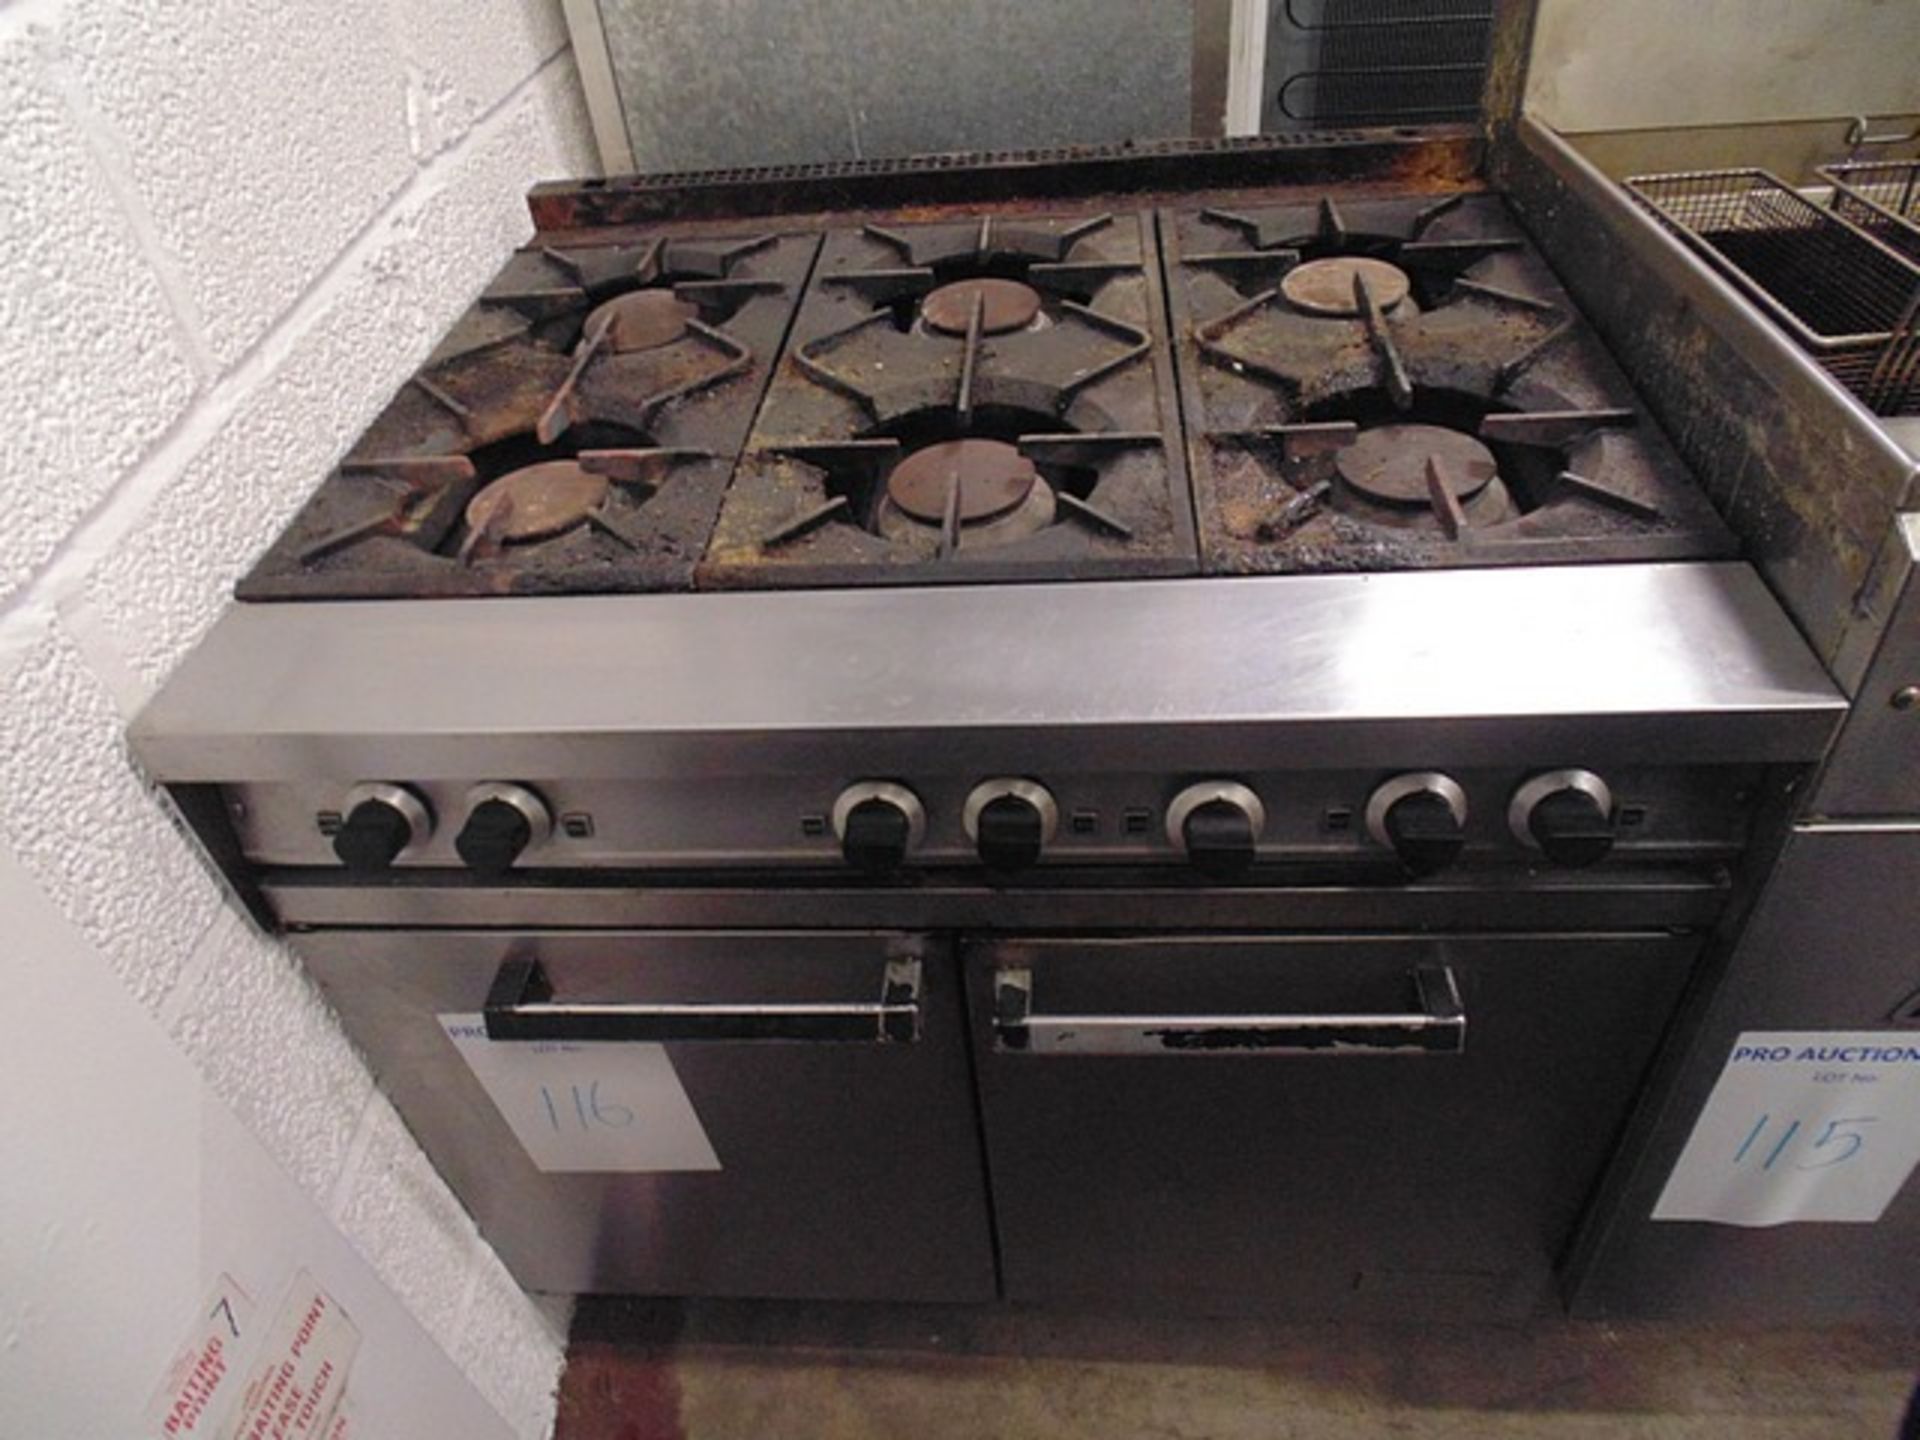 Stainless steel six burner gas range and oven 3/4" BSP female gas connection 5.8kW burners 7.2kW